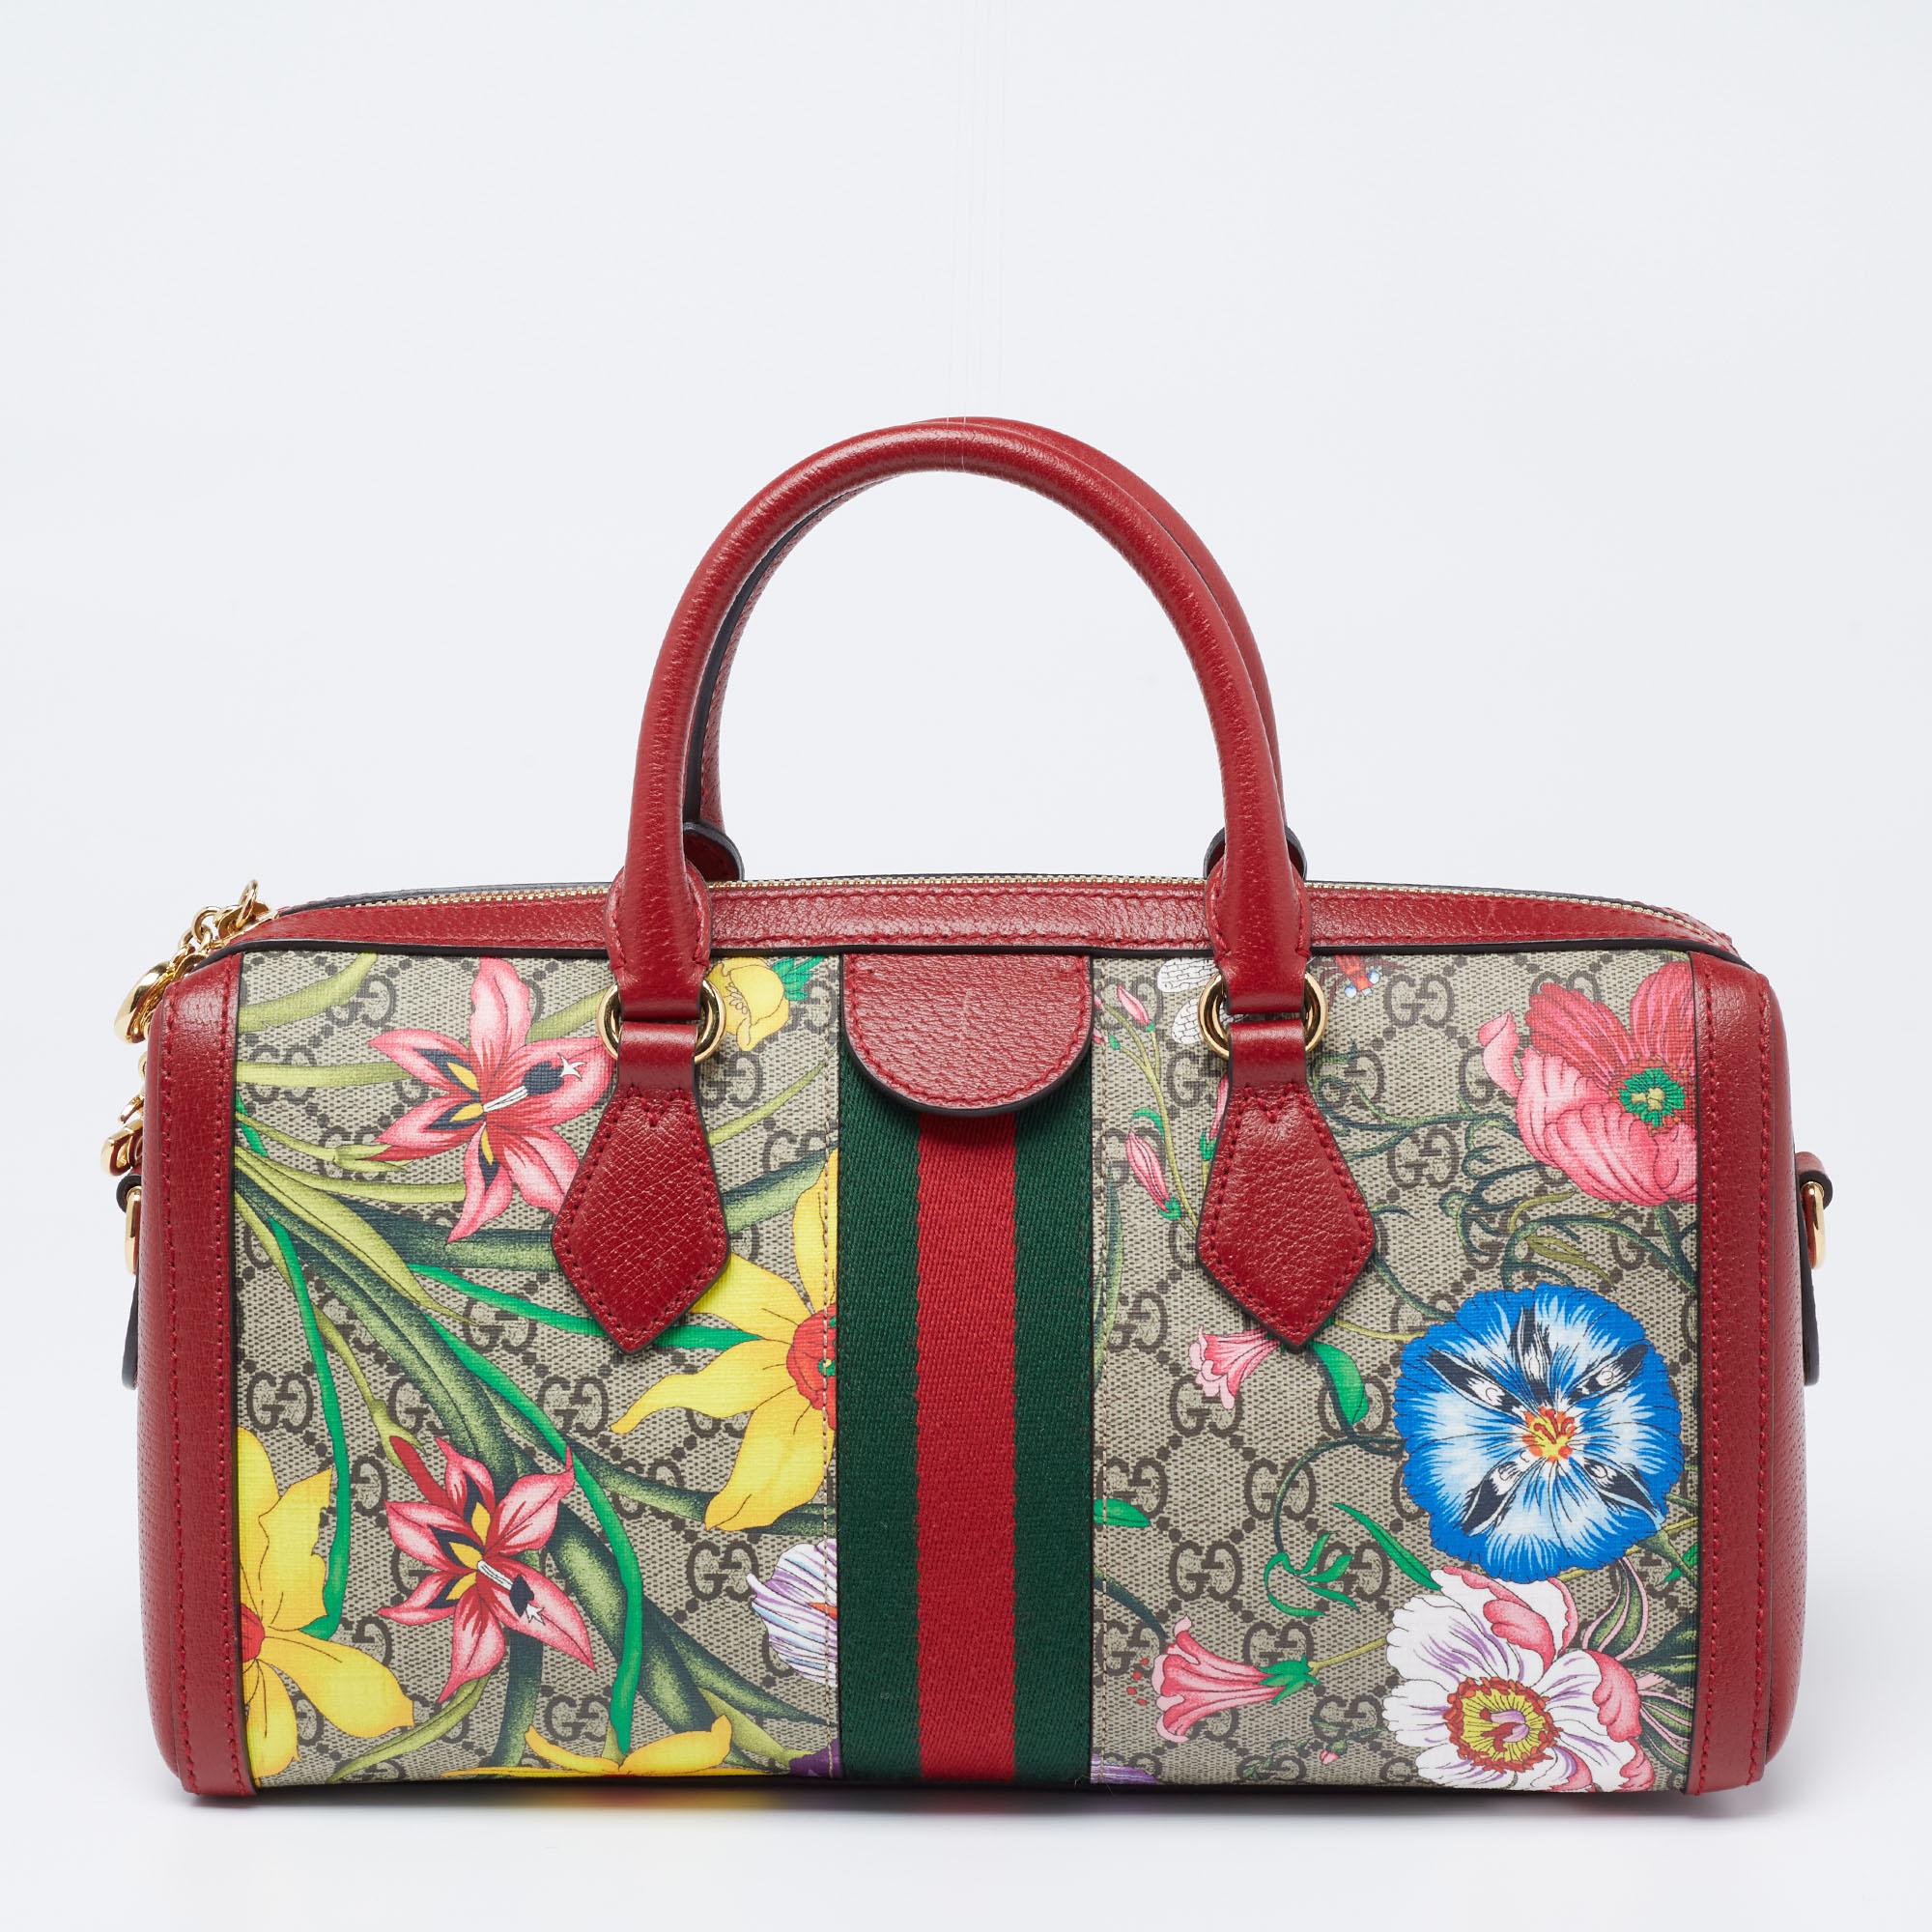 Crafted from GG Supreme canvas and leather, this Gucci Ophidia bag arrives in a structured shape for a sophisticated look. It features the iconic Web stripe, Flora motifs, and the GG motif—all Gucci codes. The bag suspends from two short handles and